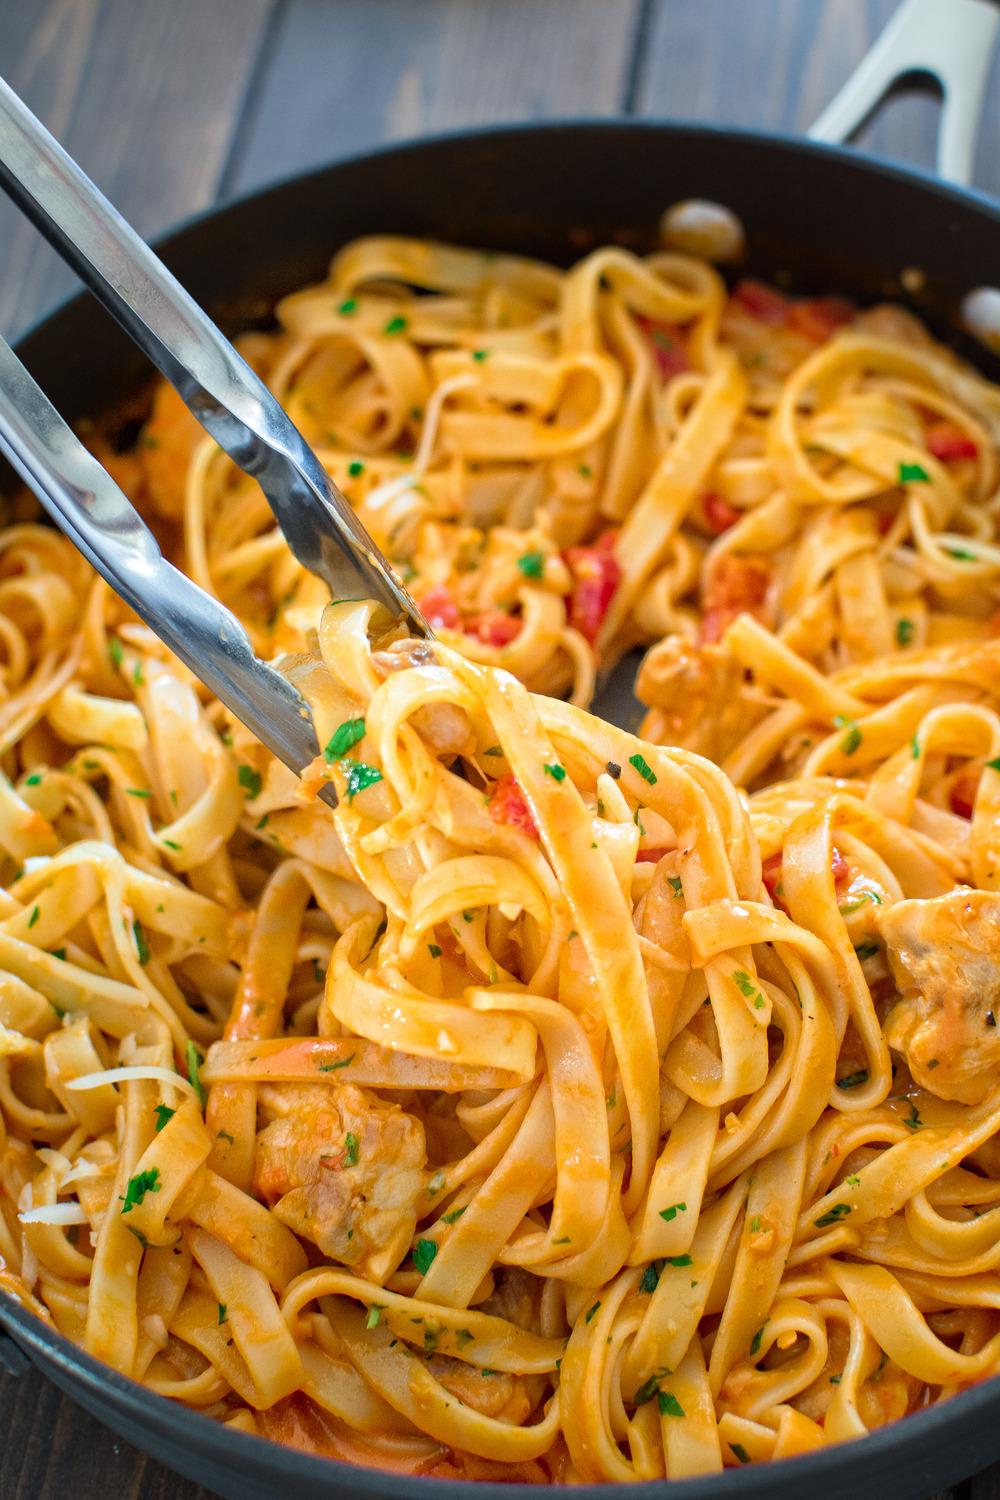 CHICKEN FETTUCCINE Cook Time - 20 mins Total Time - 30 mins 8 oz. fettuccine (or pasta of your choice) 1/2 lb. chicken, cut into pieces 1 tbsp. olive oil 1 garlic clove, finely chopped 16 oz.